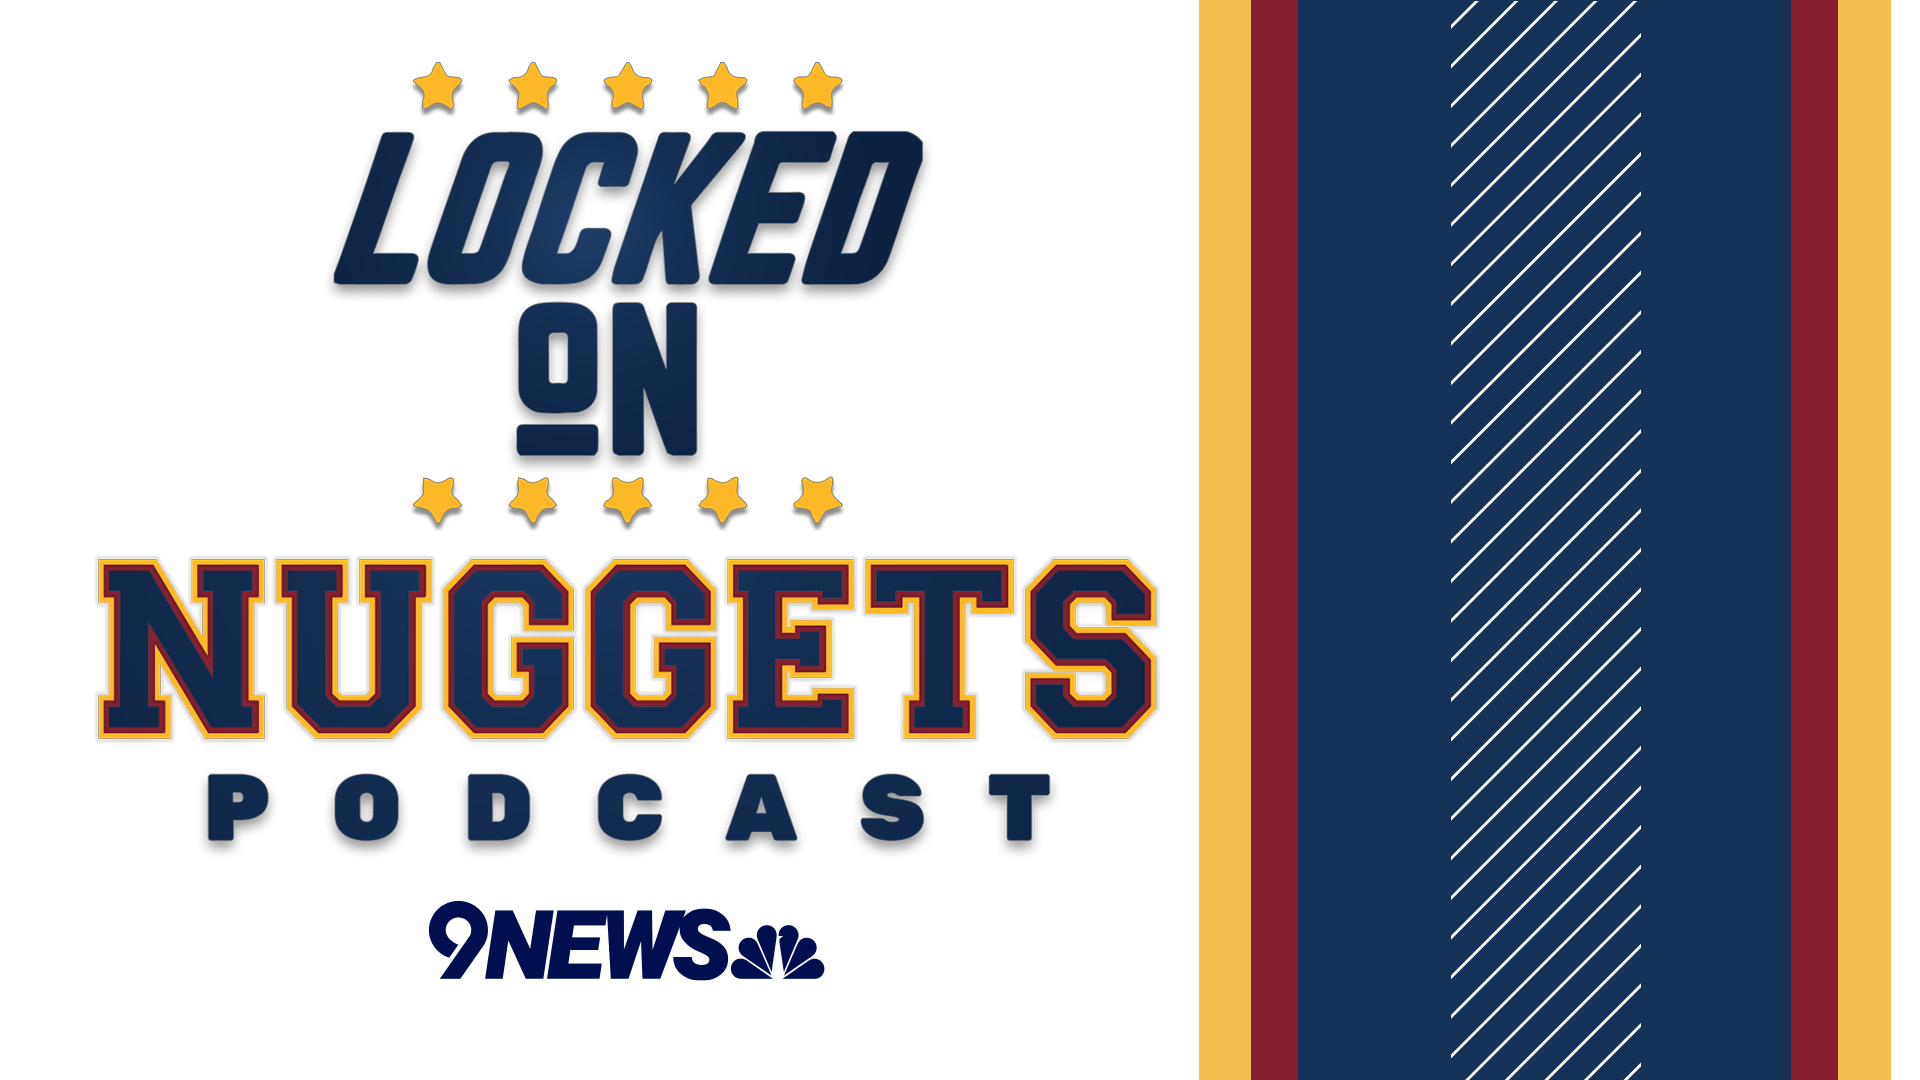 The Locked On Nuggets podcast team talks about how some key players can improve in the offseason.